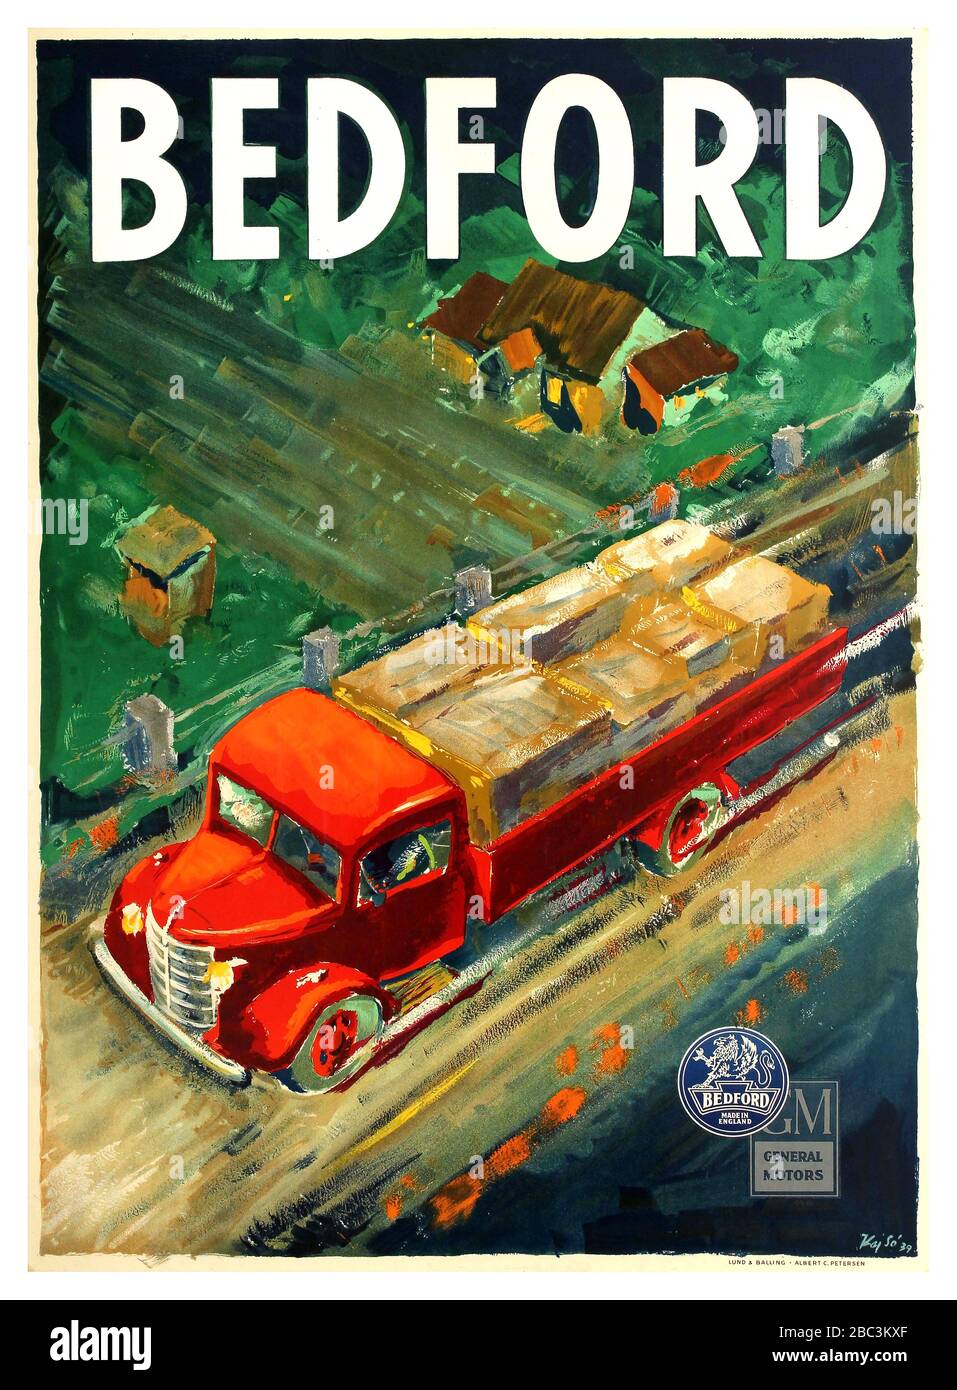 BEDFORD TRUCKS Vintage advertising poster for British truck manufacturer Bedford featuring an aerial view of a loaded red Bedford truck driving in the countryside past a house and a field with the text above and the Bedford and General Motors logos below. Based in Luton Bedfordshire, Bedford Vehicles was founded in 1930 by Vauxhall Motors to produce commercial lorries, trucks and vans; the company was taken over by the American company General Motors in 1925. Printed by Lund & Balling - Albert C. Petersen. .  Denmark, 1939, designer: Kaj So, Stock Photo